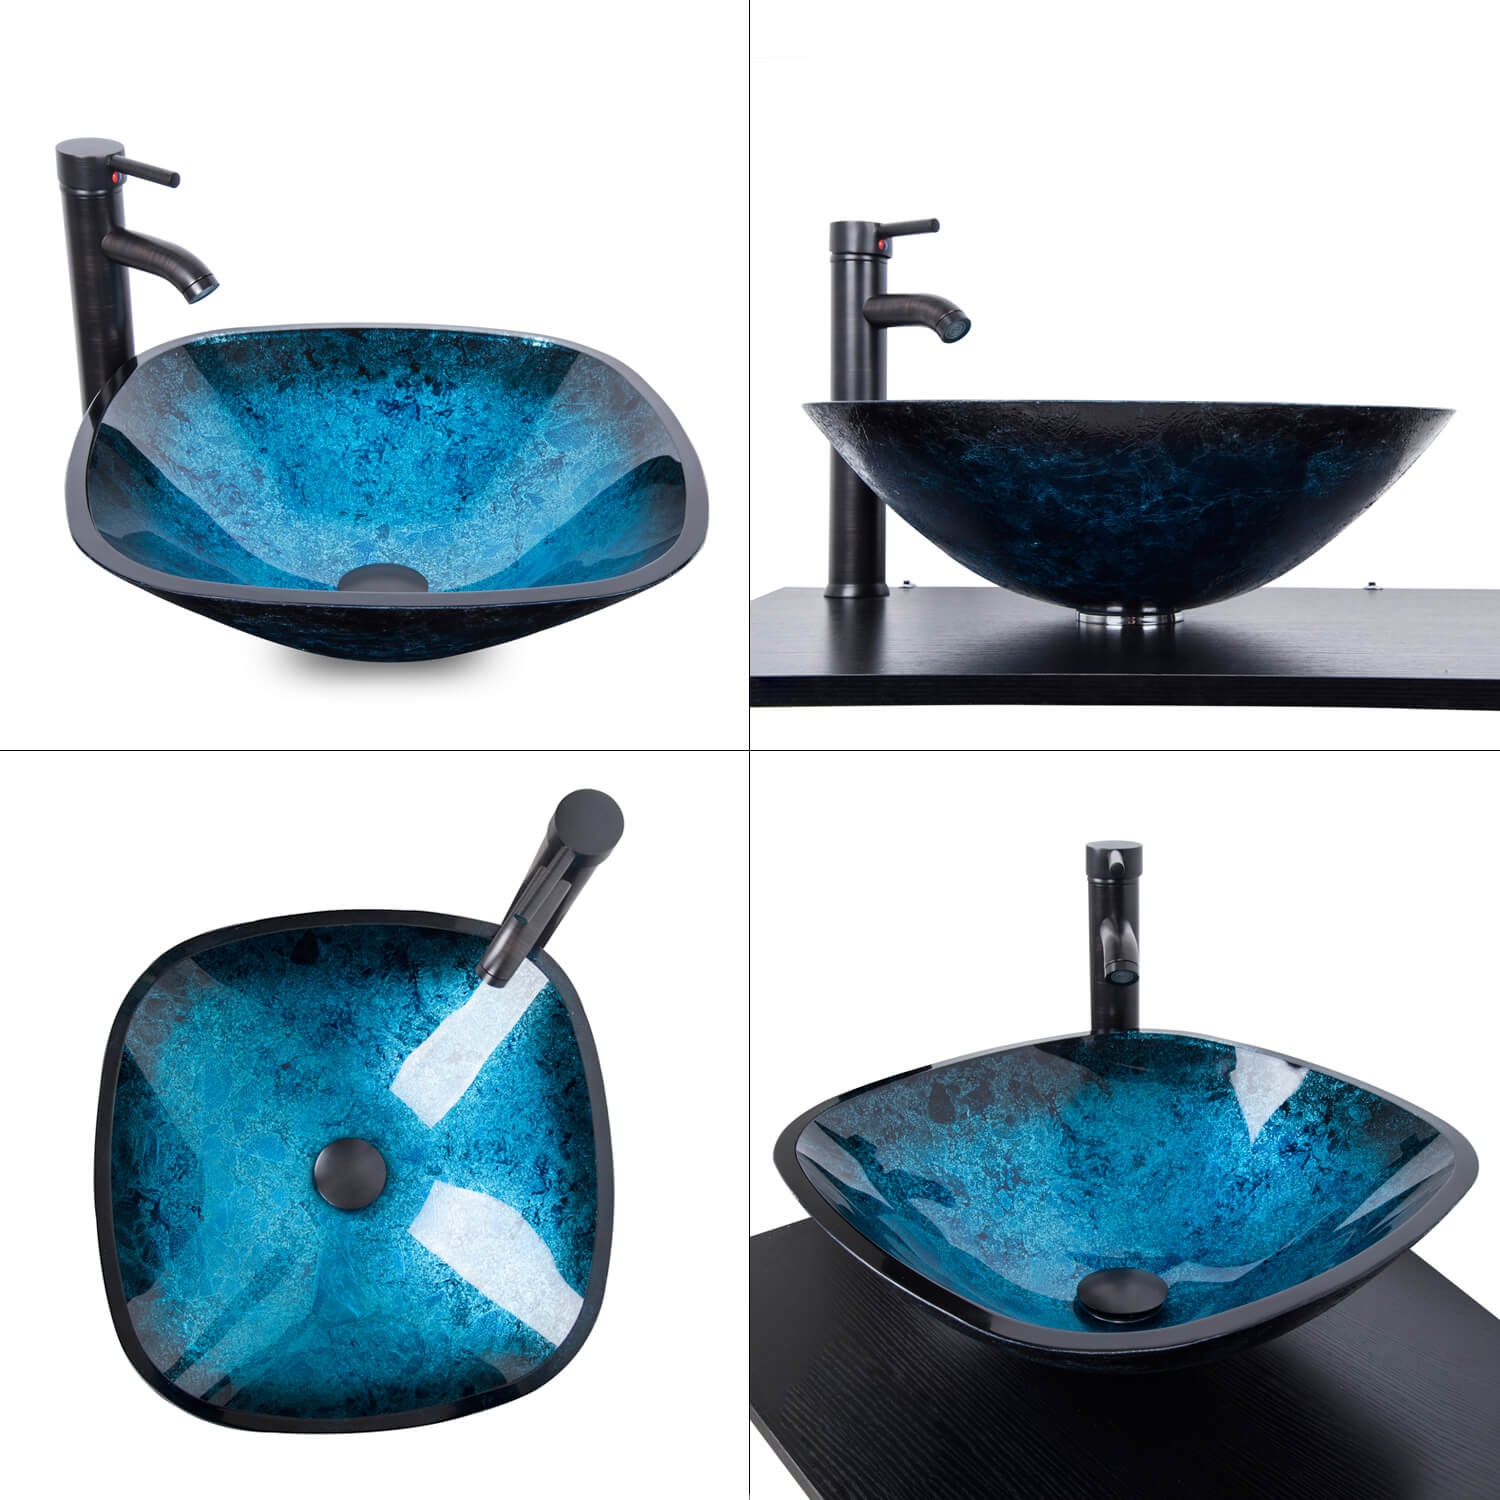 4 angle views of Elecwish square sink